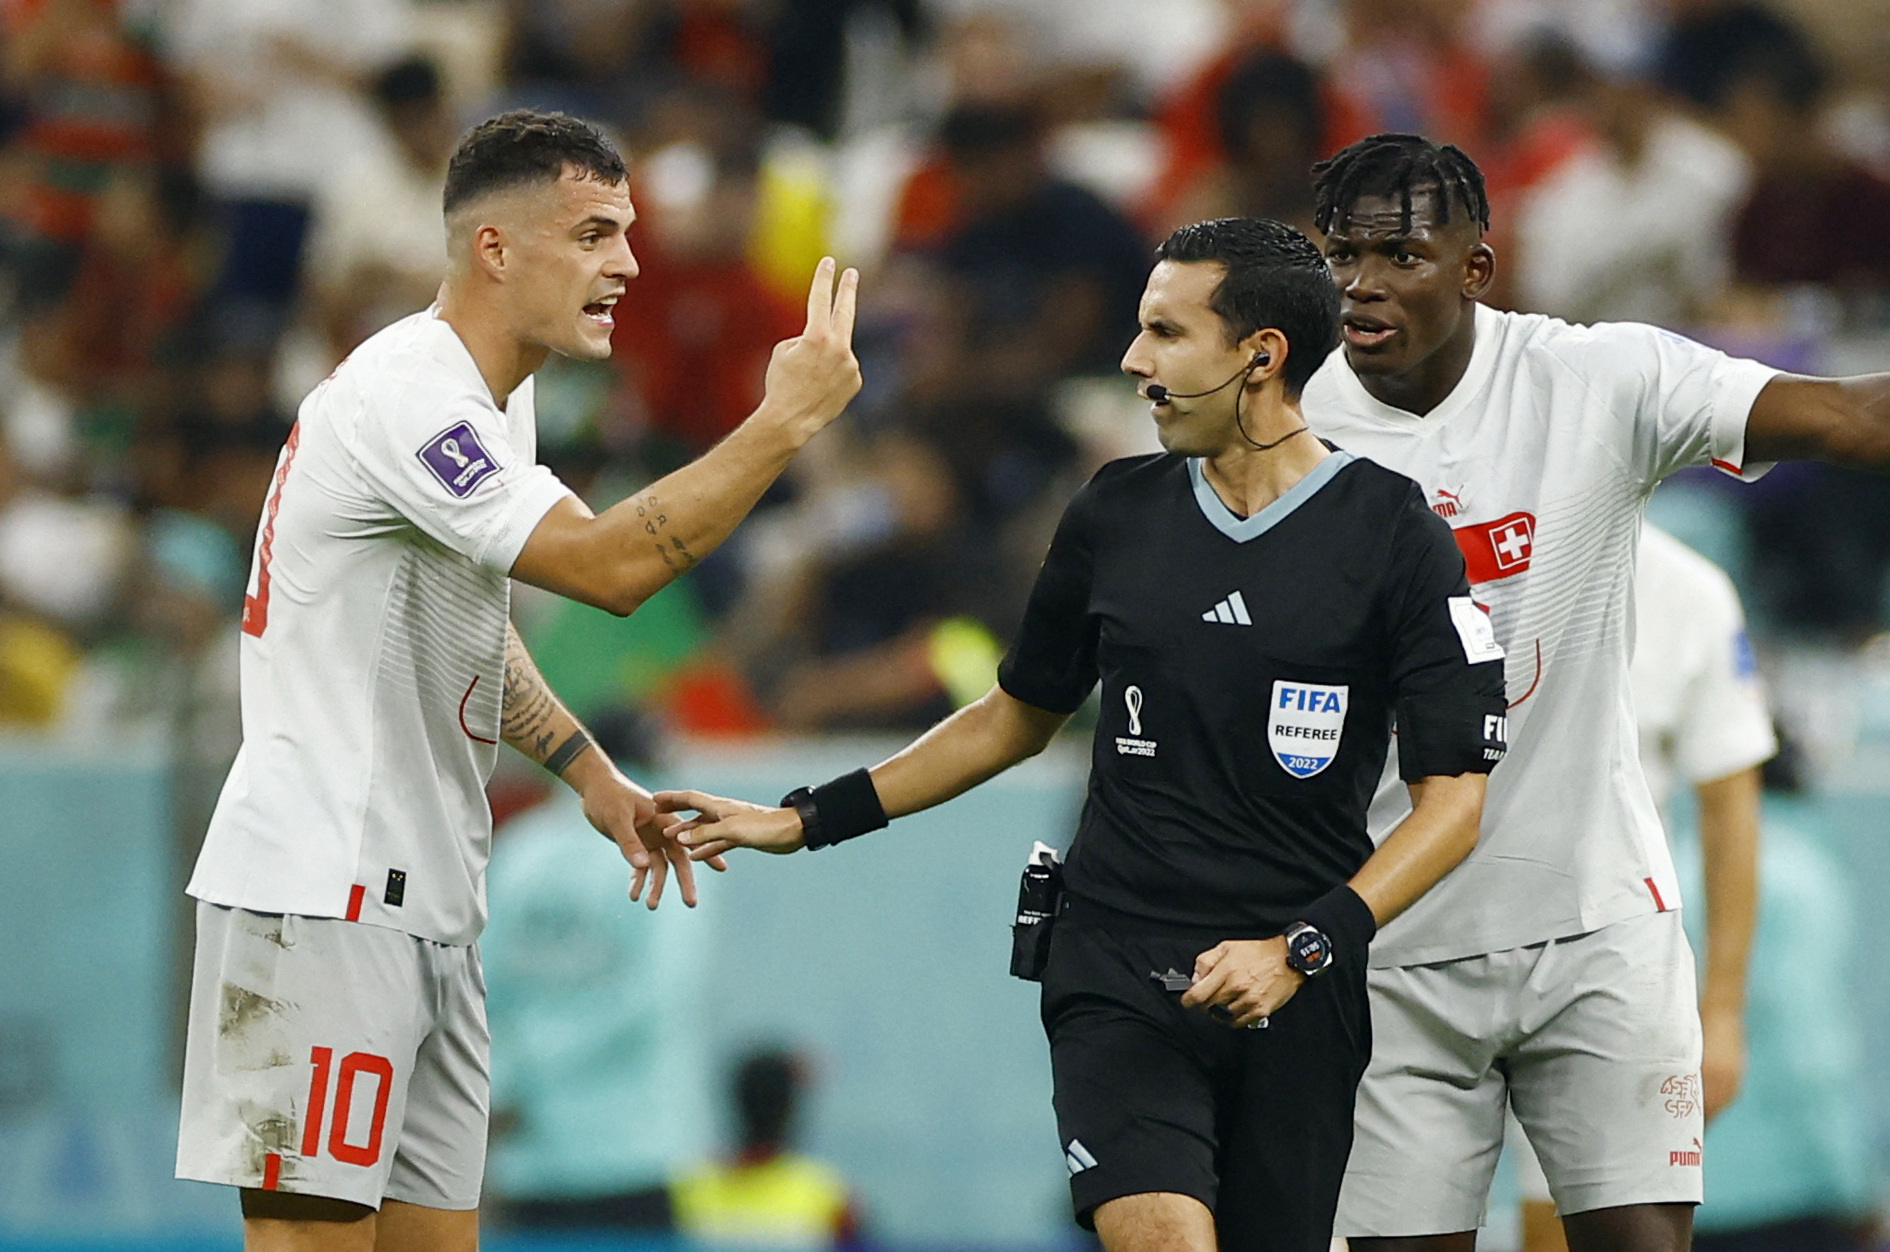 Soccer Football - FIFA World Cup Qatar 2022 - Round of 16 - Portugal v Switzerland - Lusail Stadium, Lusail, Qatar - December 6, 2022 Switzerland's Granit Xhaka remonstrates with referee Cesar Arturo Ramos after Portugal's Goncalo Ramos scores their third goal REUTERS/John Sibley